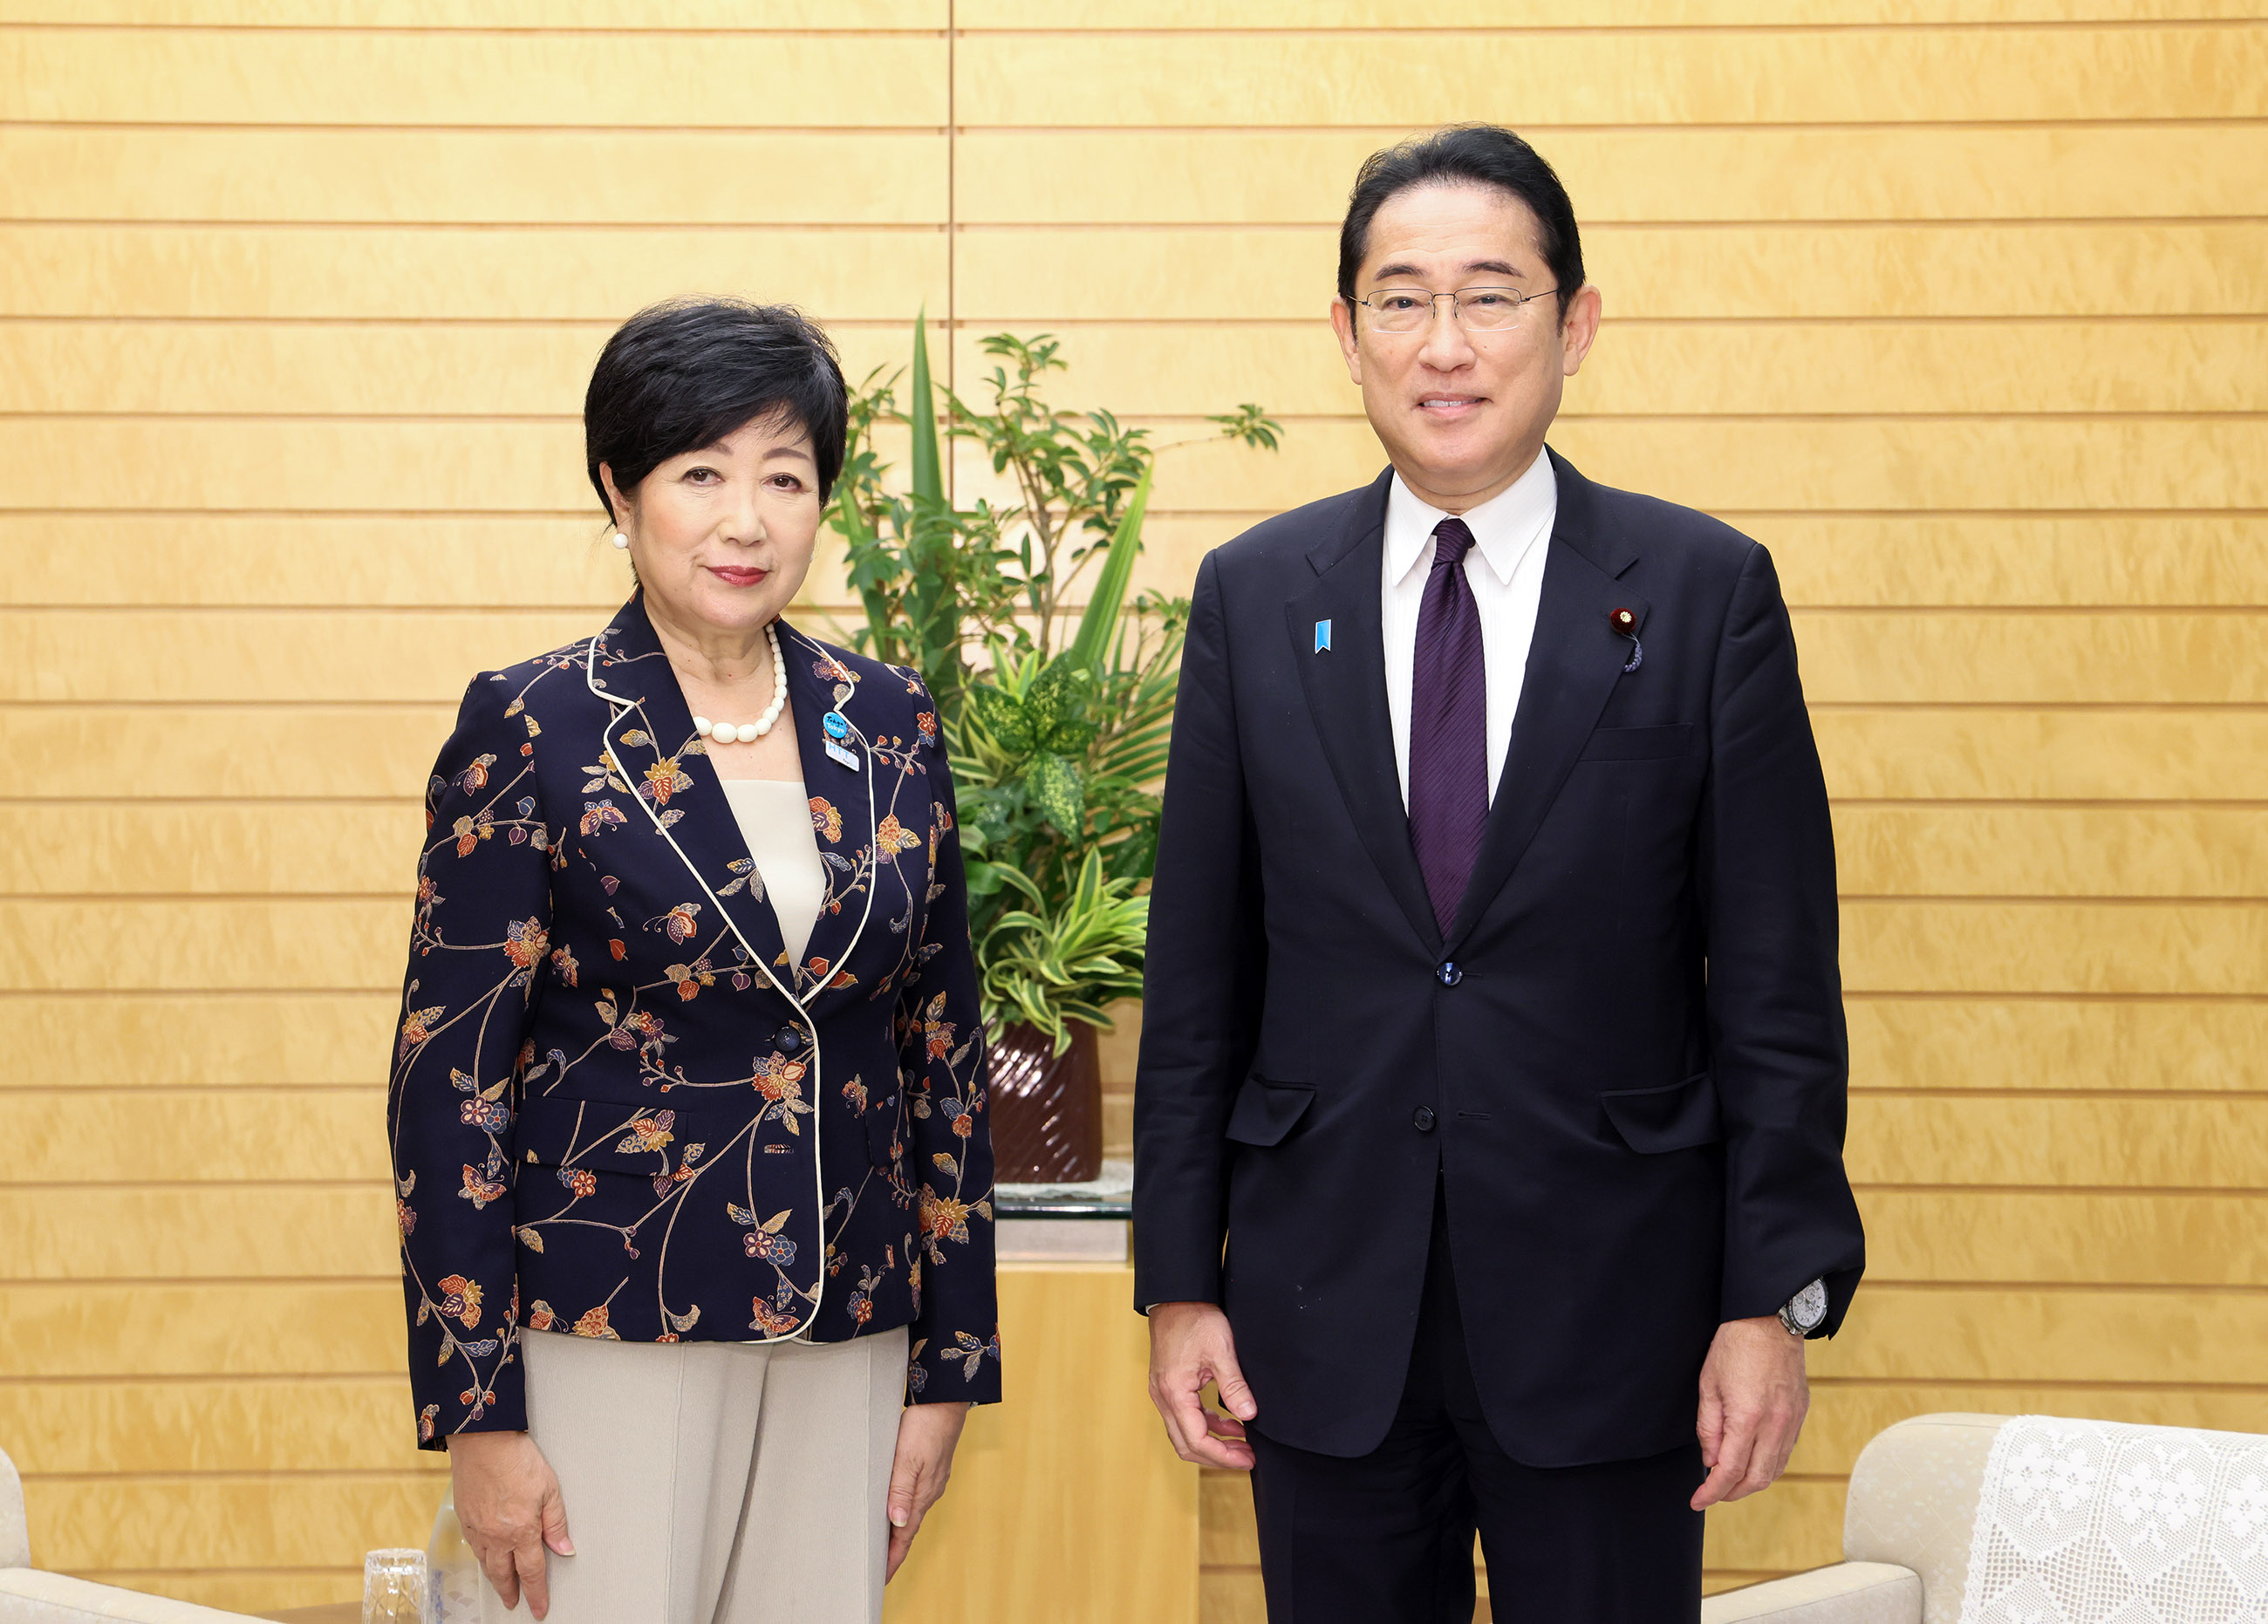 Meeting with the Governor of Tokyo